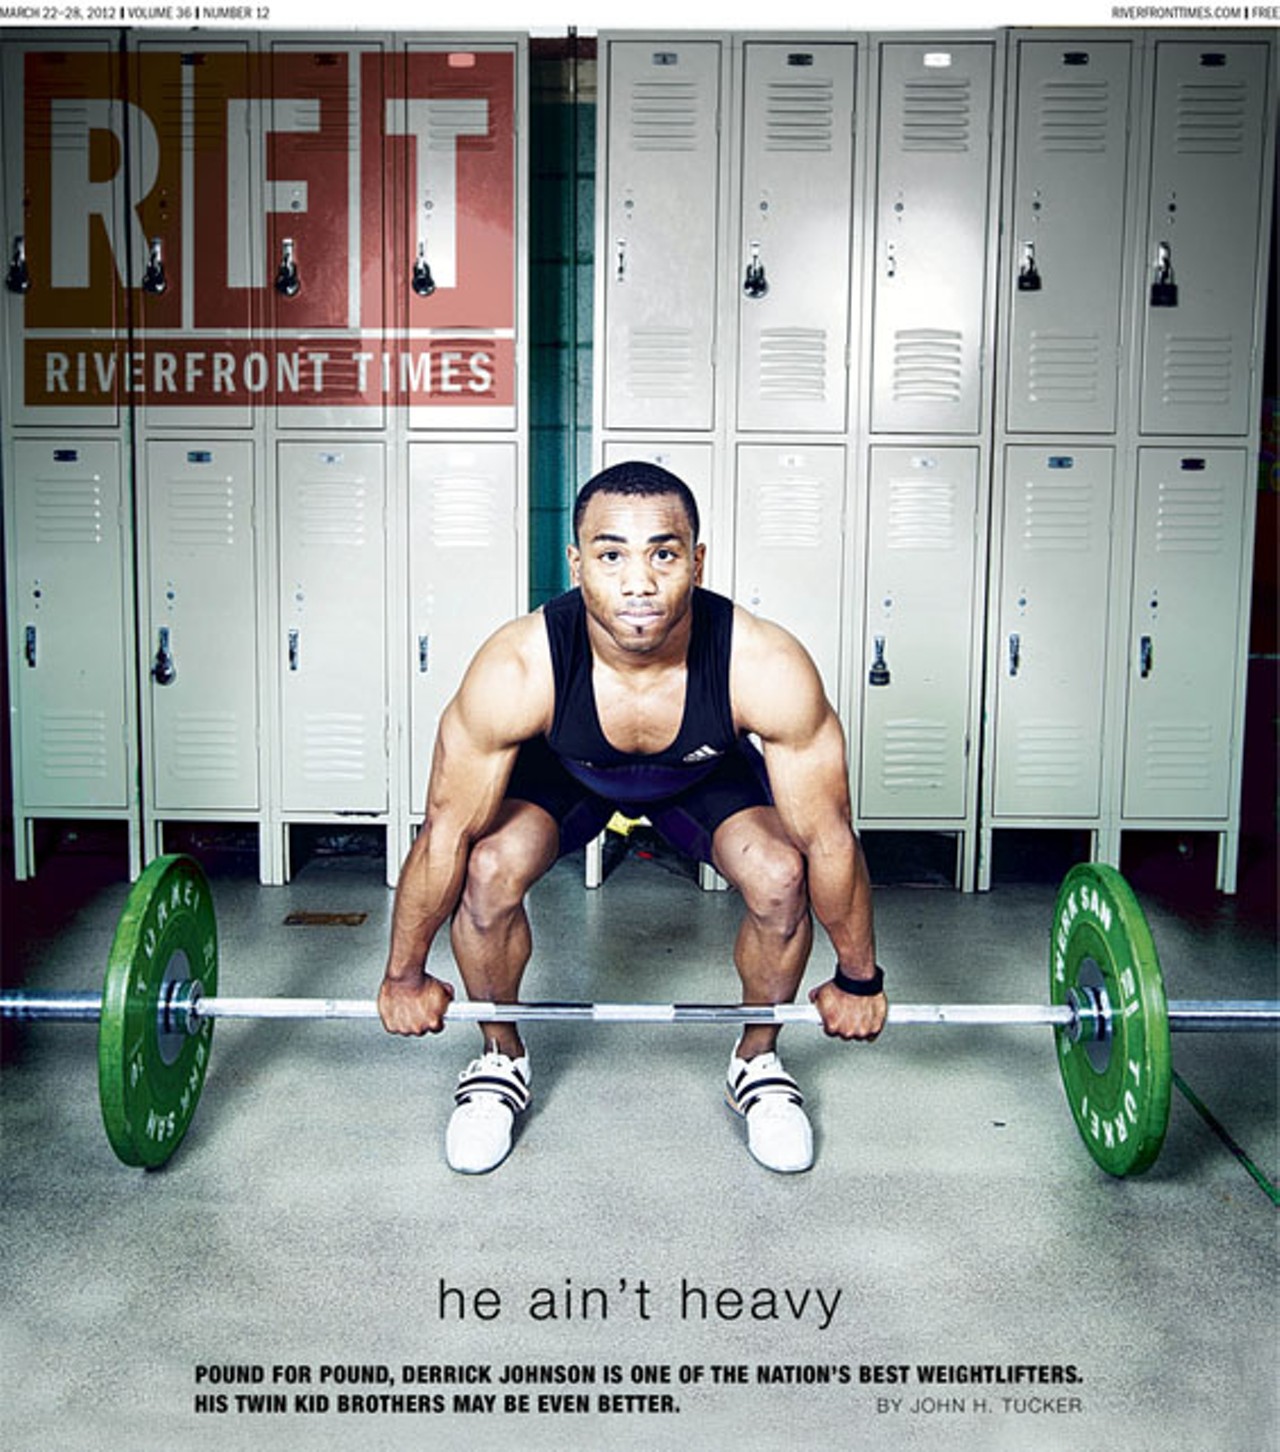 He Ain't Heavy: Pound for pound, Derrick Johnson is one of the nation's best weightlifters. His twin kid brothers may be even better. By John H. Tucker in the March 22 issue. Cover: Photo by Jennifer Silverberg.